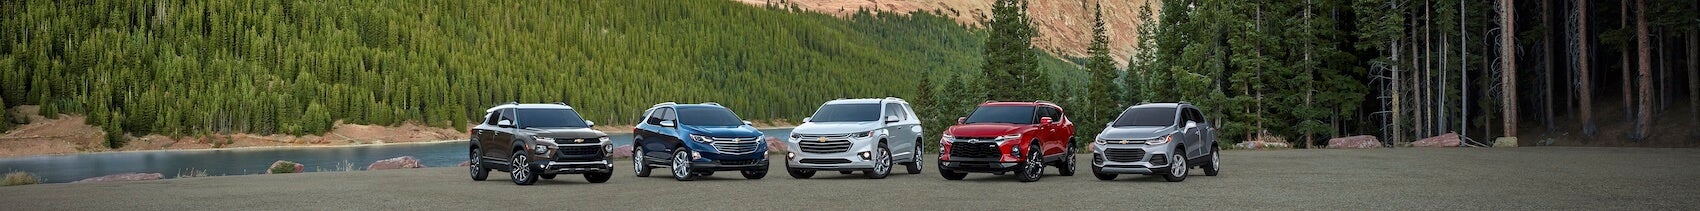 Chevy Models